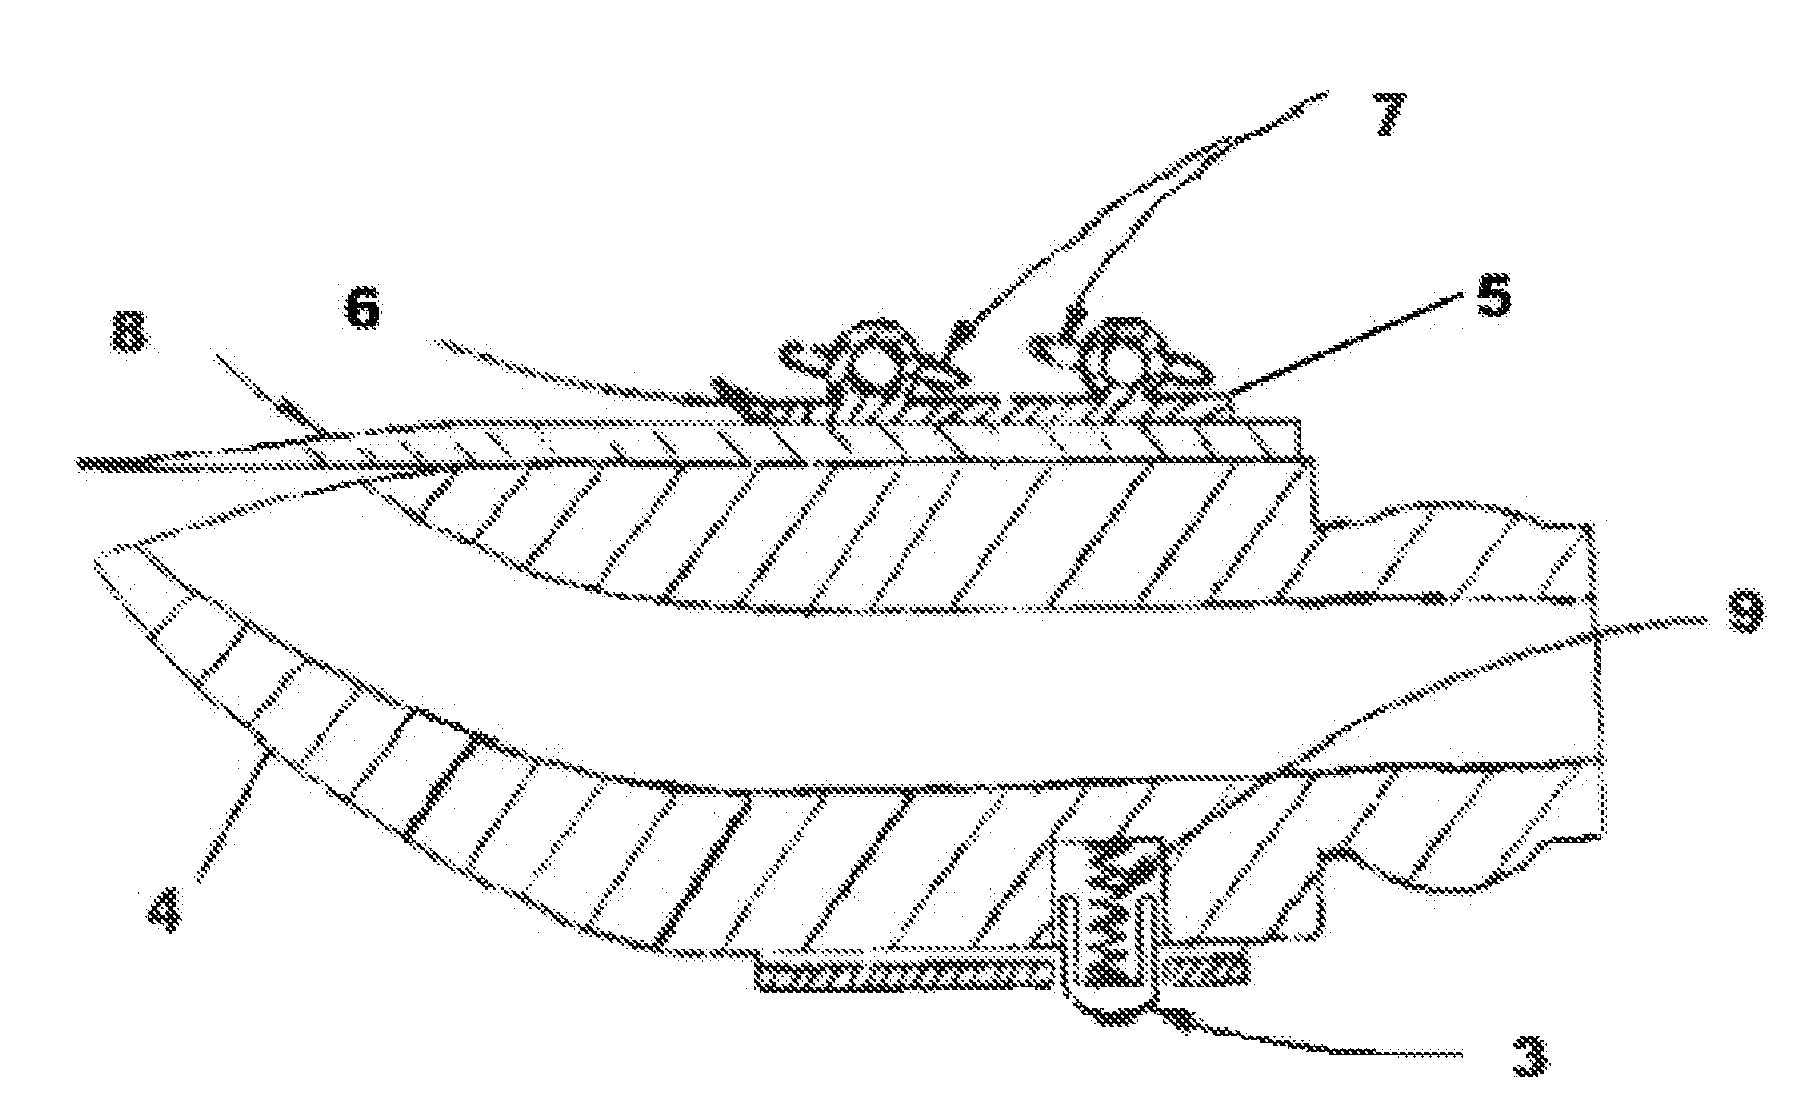 Single reed woodwind musical instrument mouthpiece apparatus and method